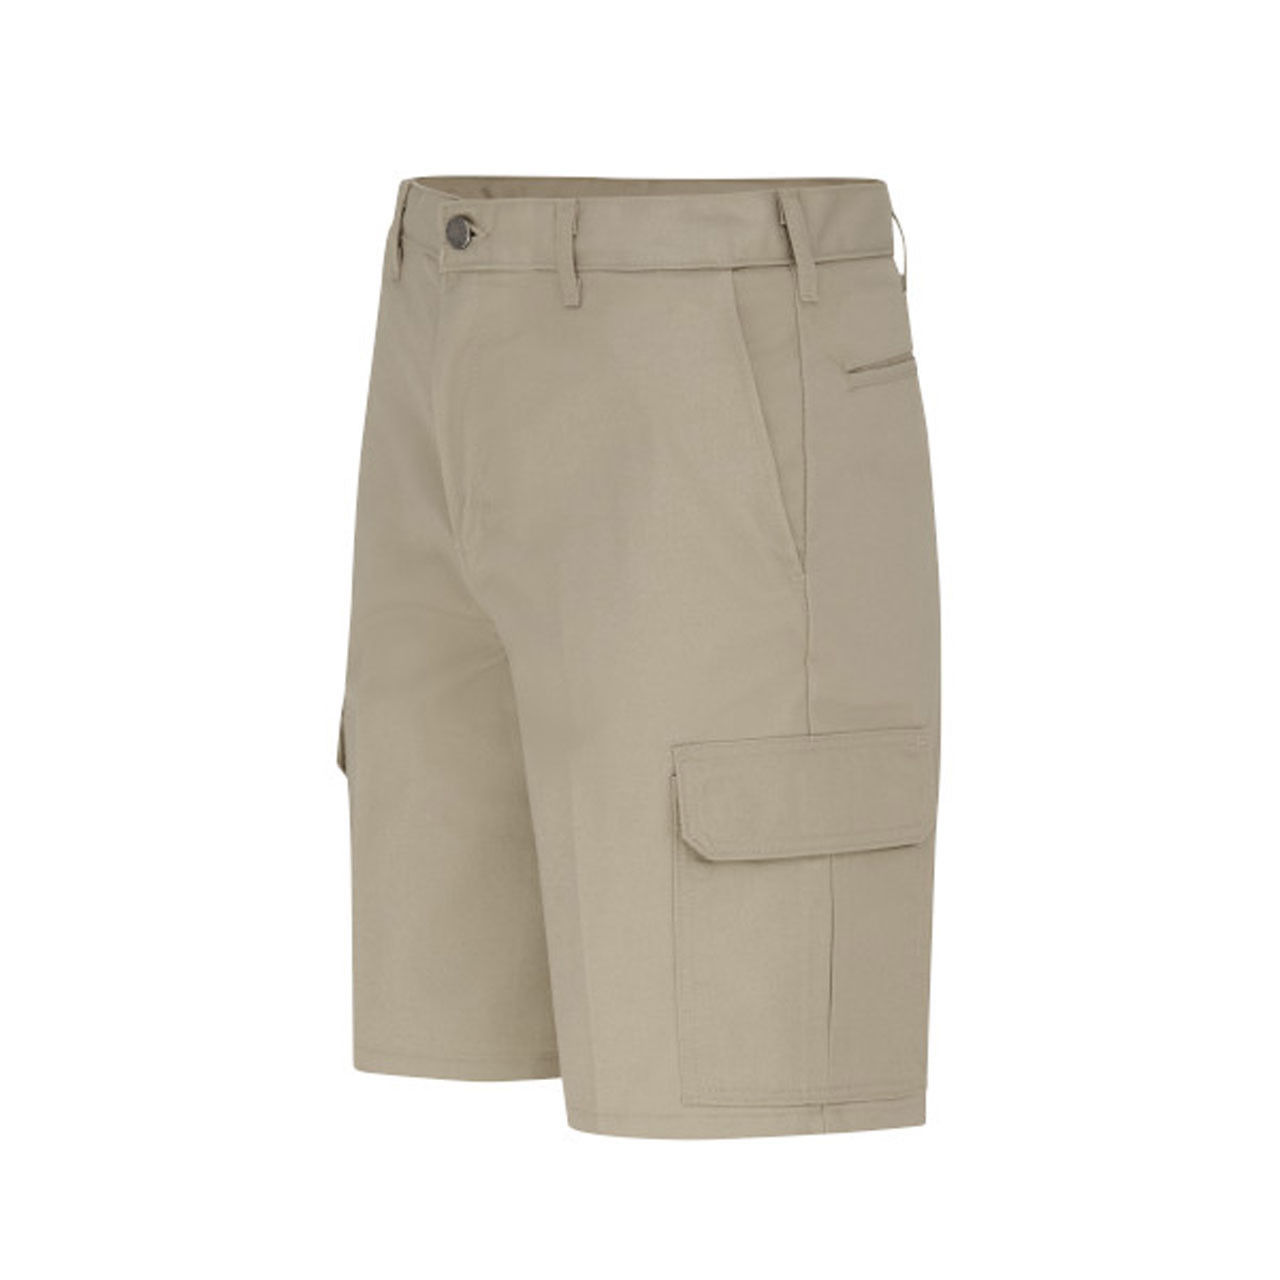 What is the design of the waistband on Dickies Industrial Cargo Short - LR00?